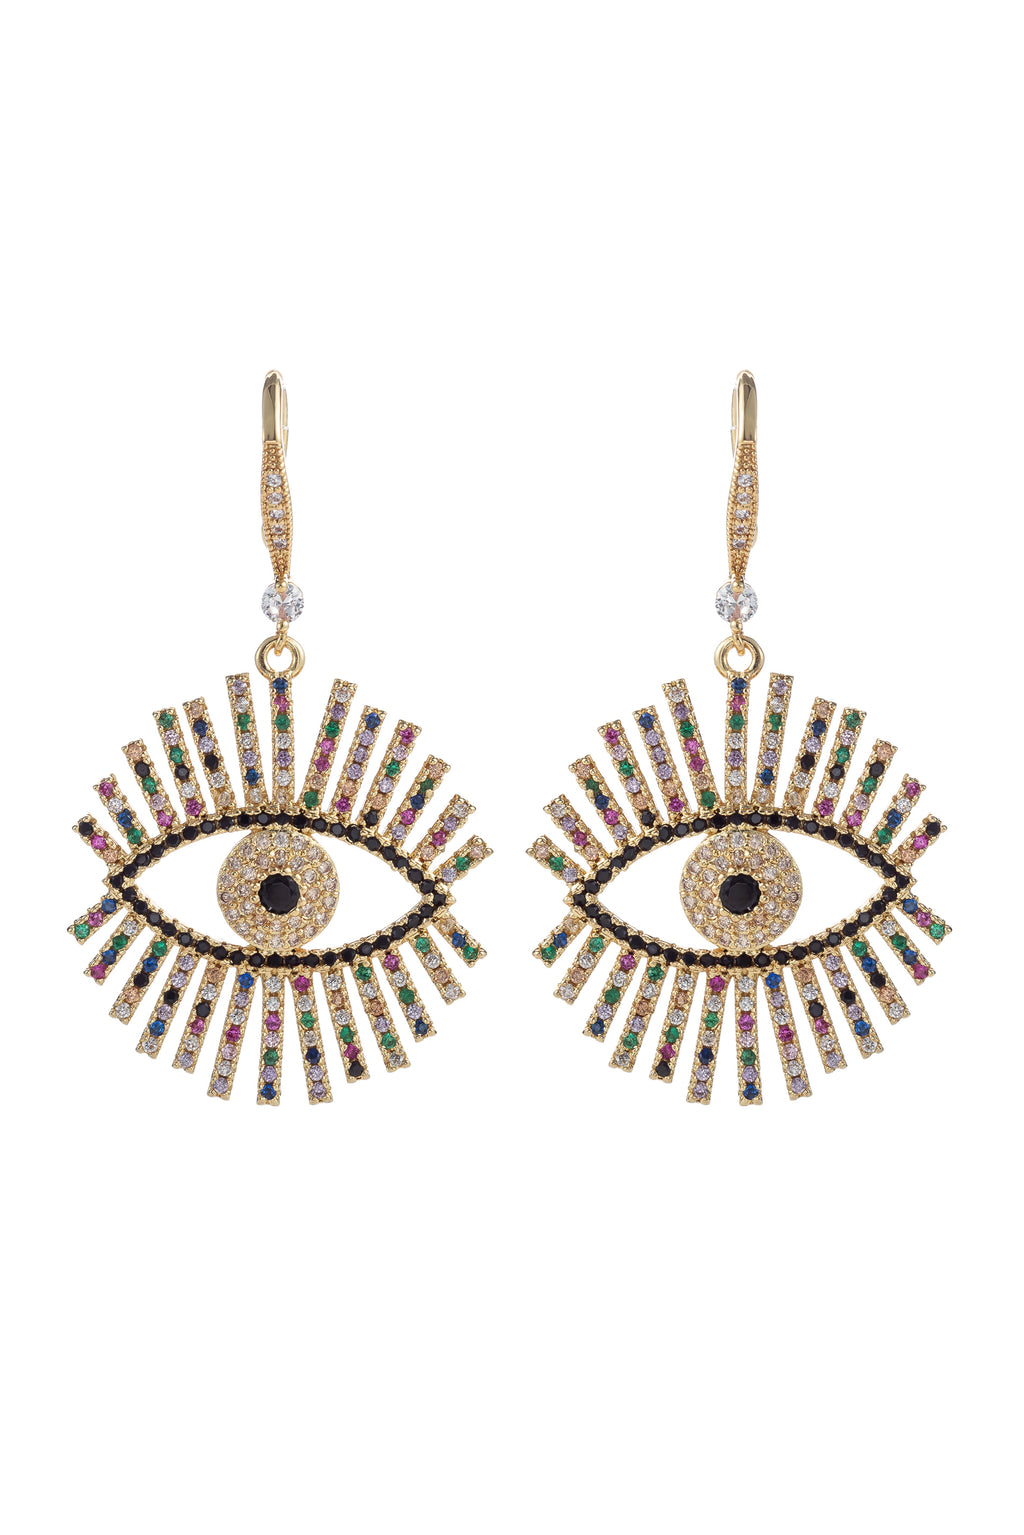 18k gold plated evil eye earrings studded with CZ crystals.